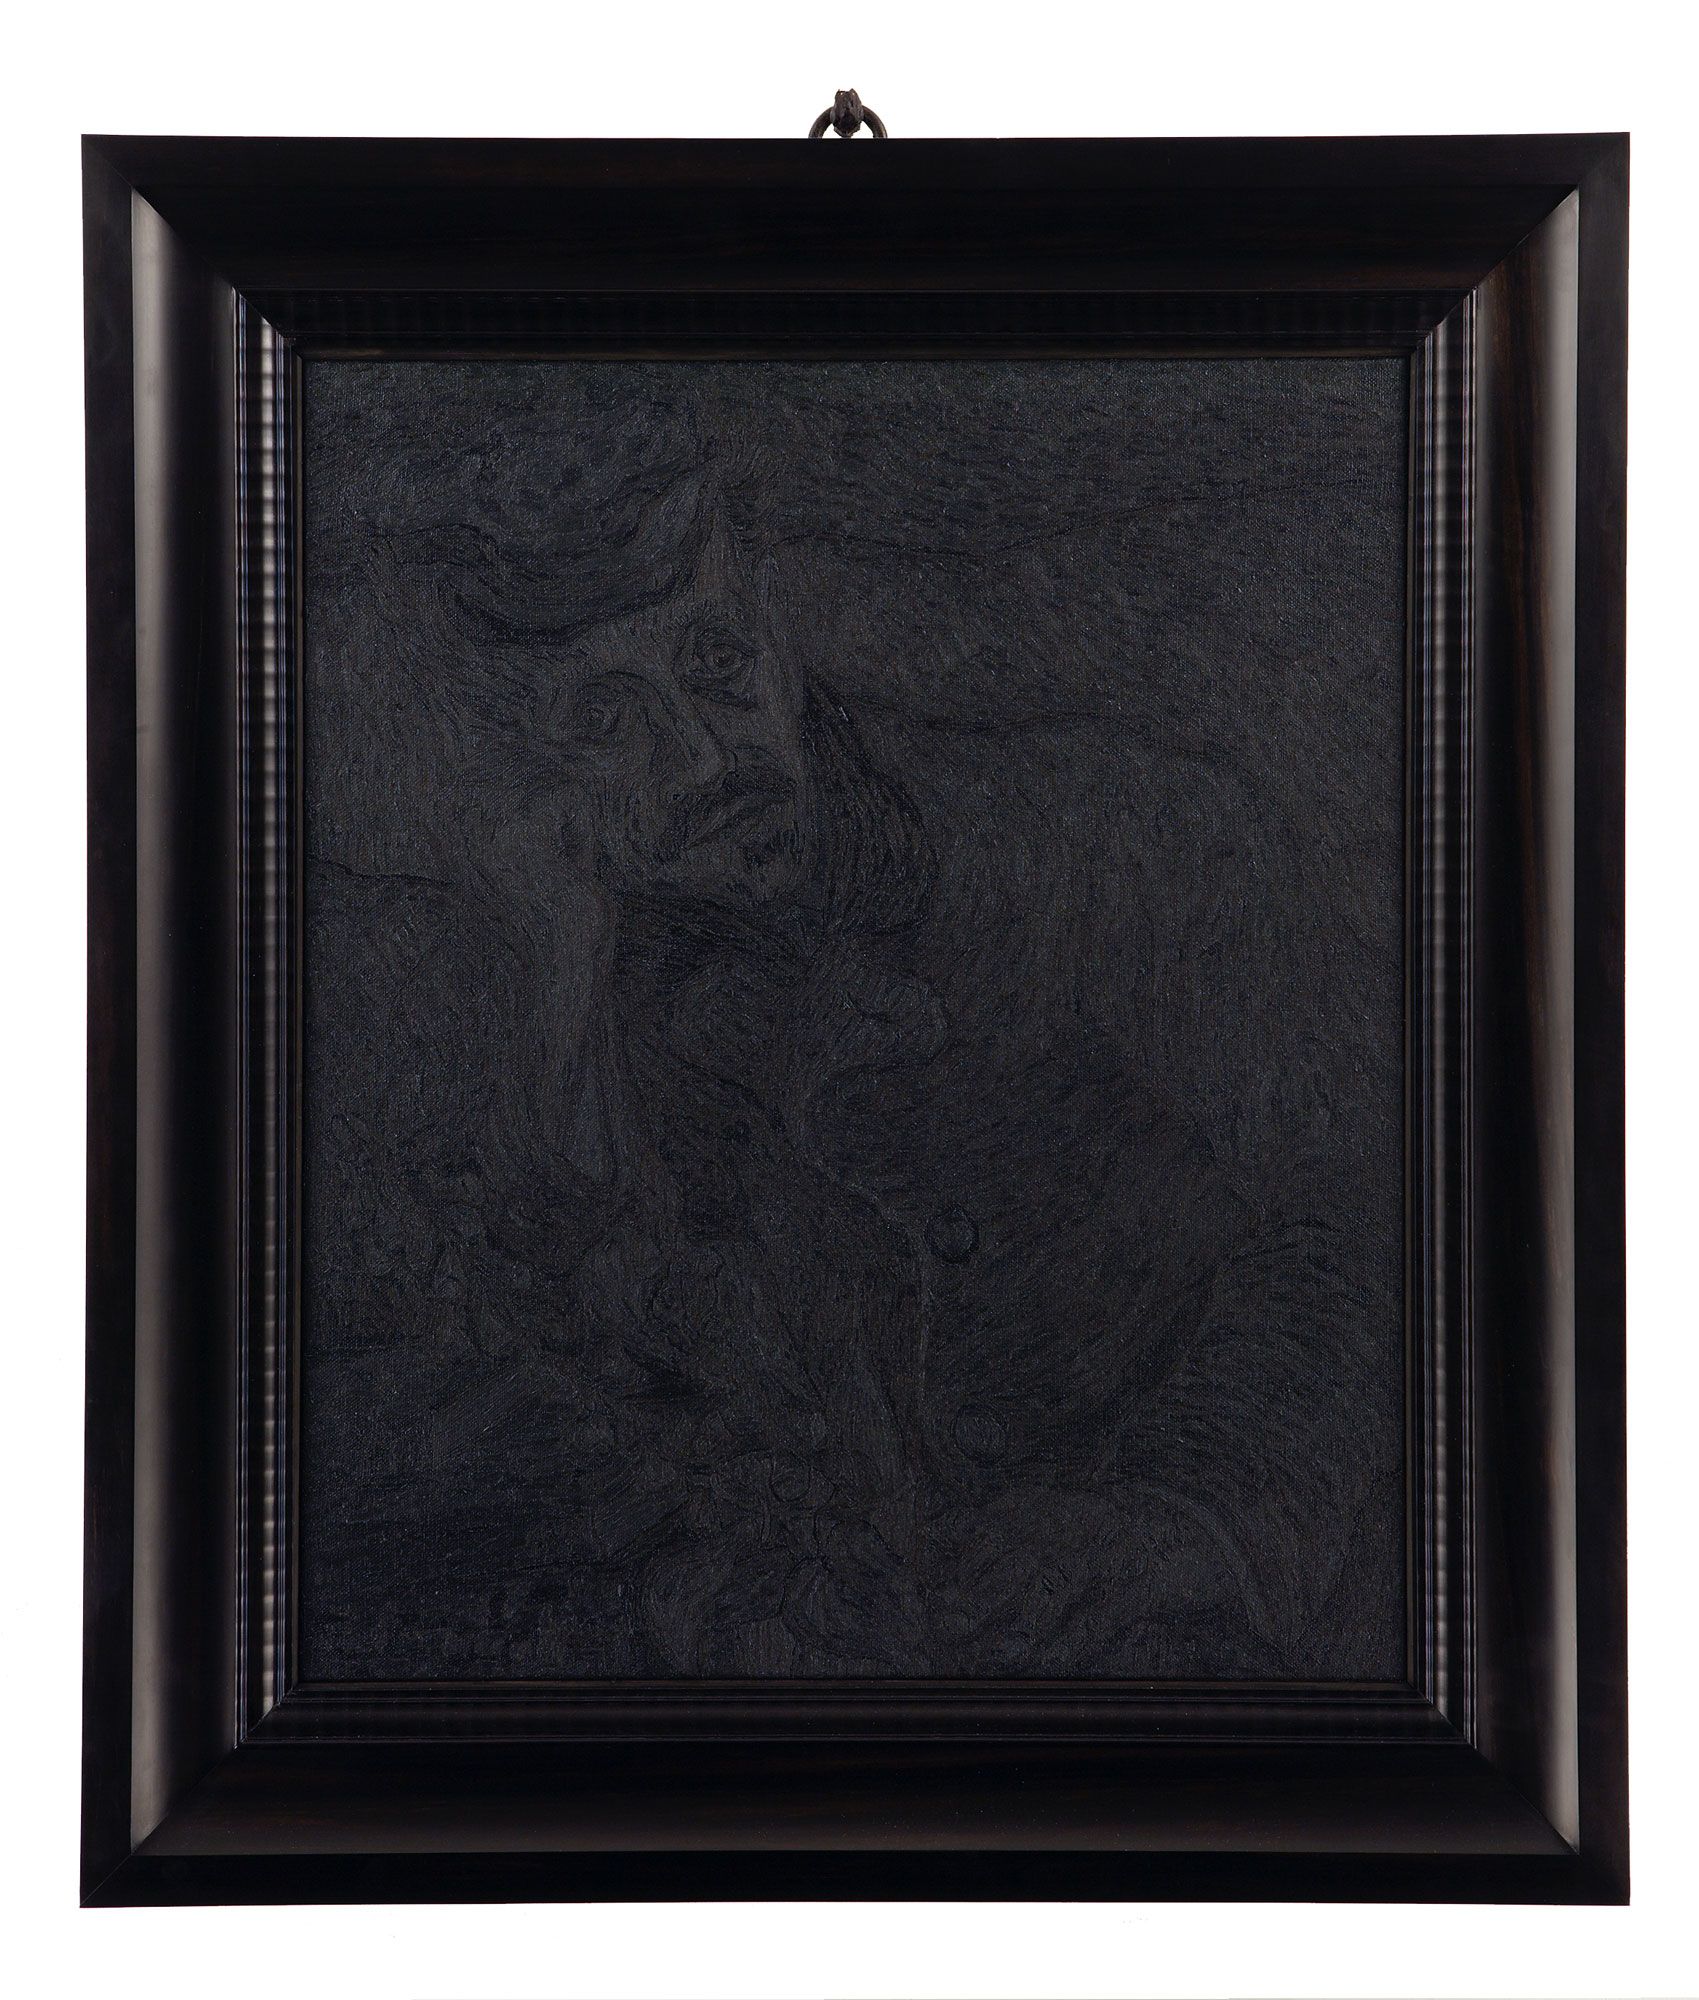 A soulful reinvention of Van Gogh's Dr Gachet painting in black oil paint by Mark Alexander - Version X.